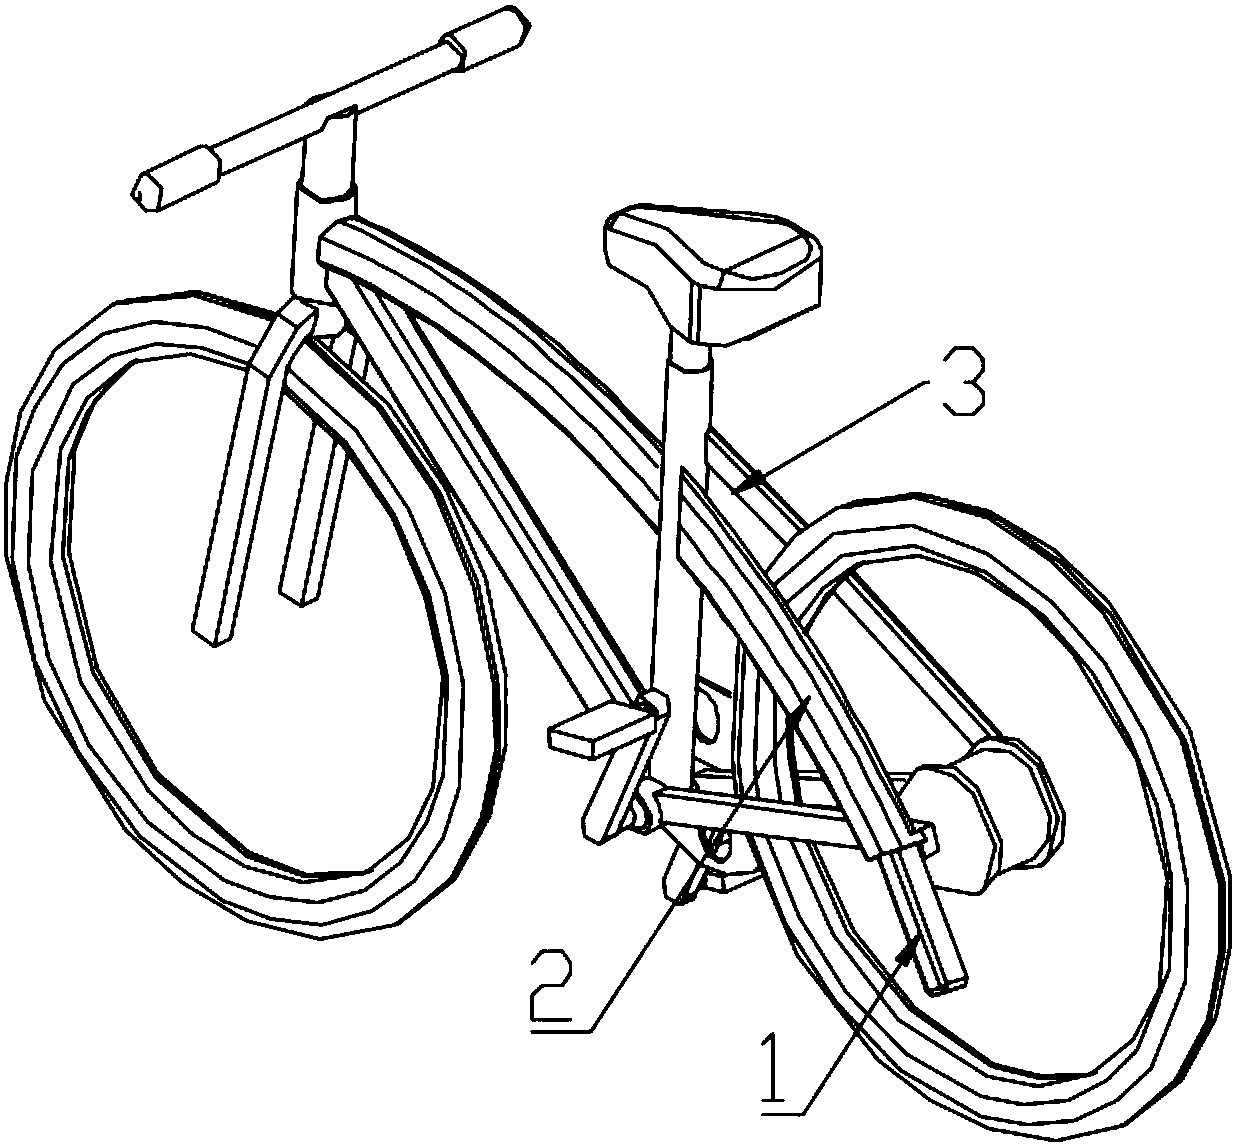 Electric bicycle with internal batteries